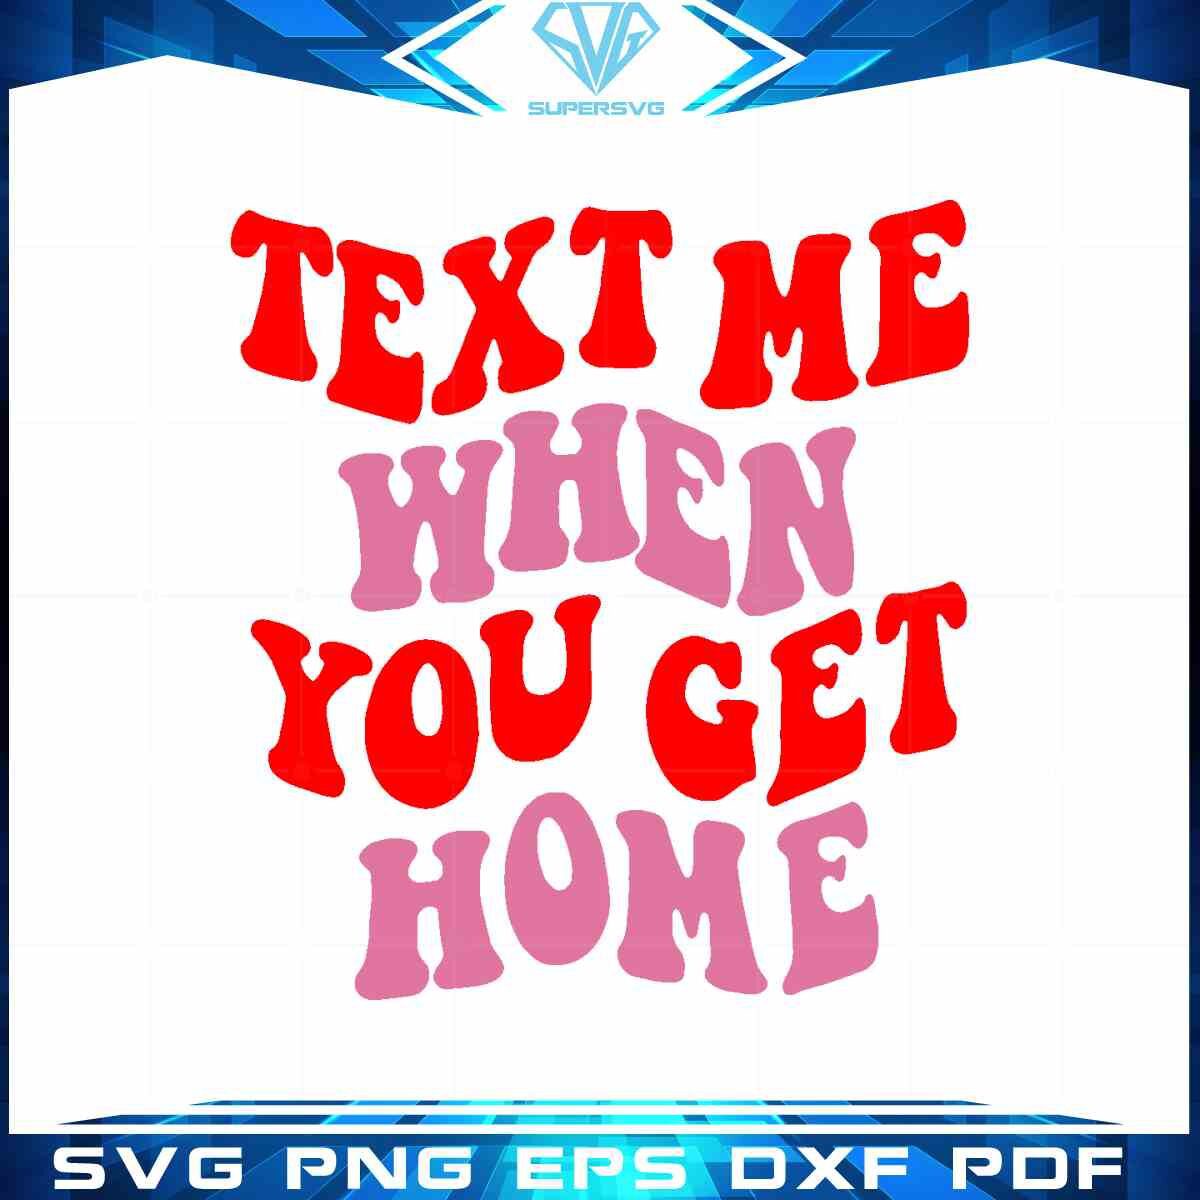 text-me-when-you-get-home-svg-cut-files